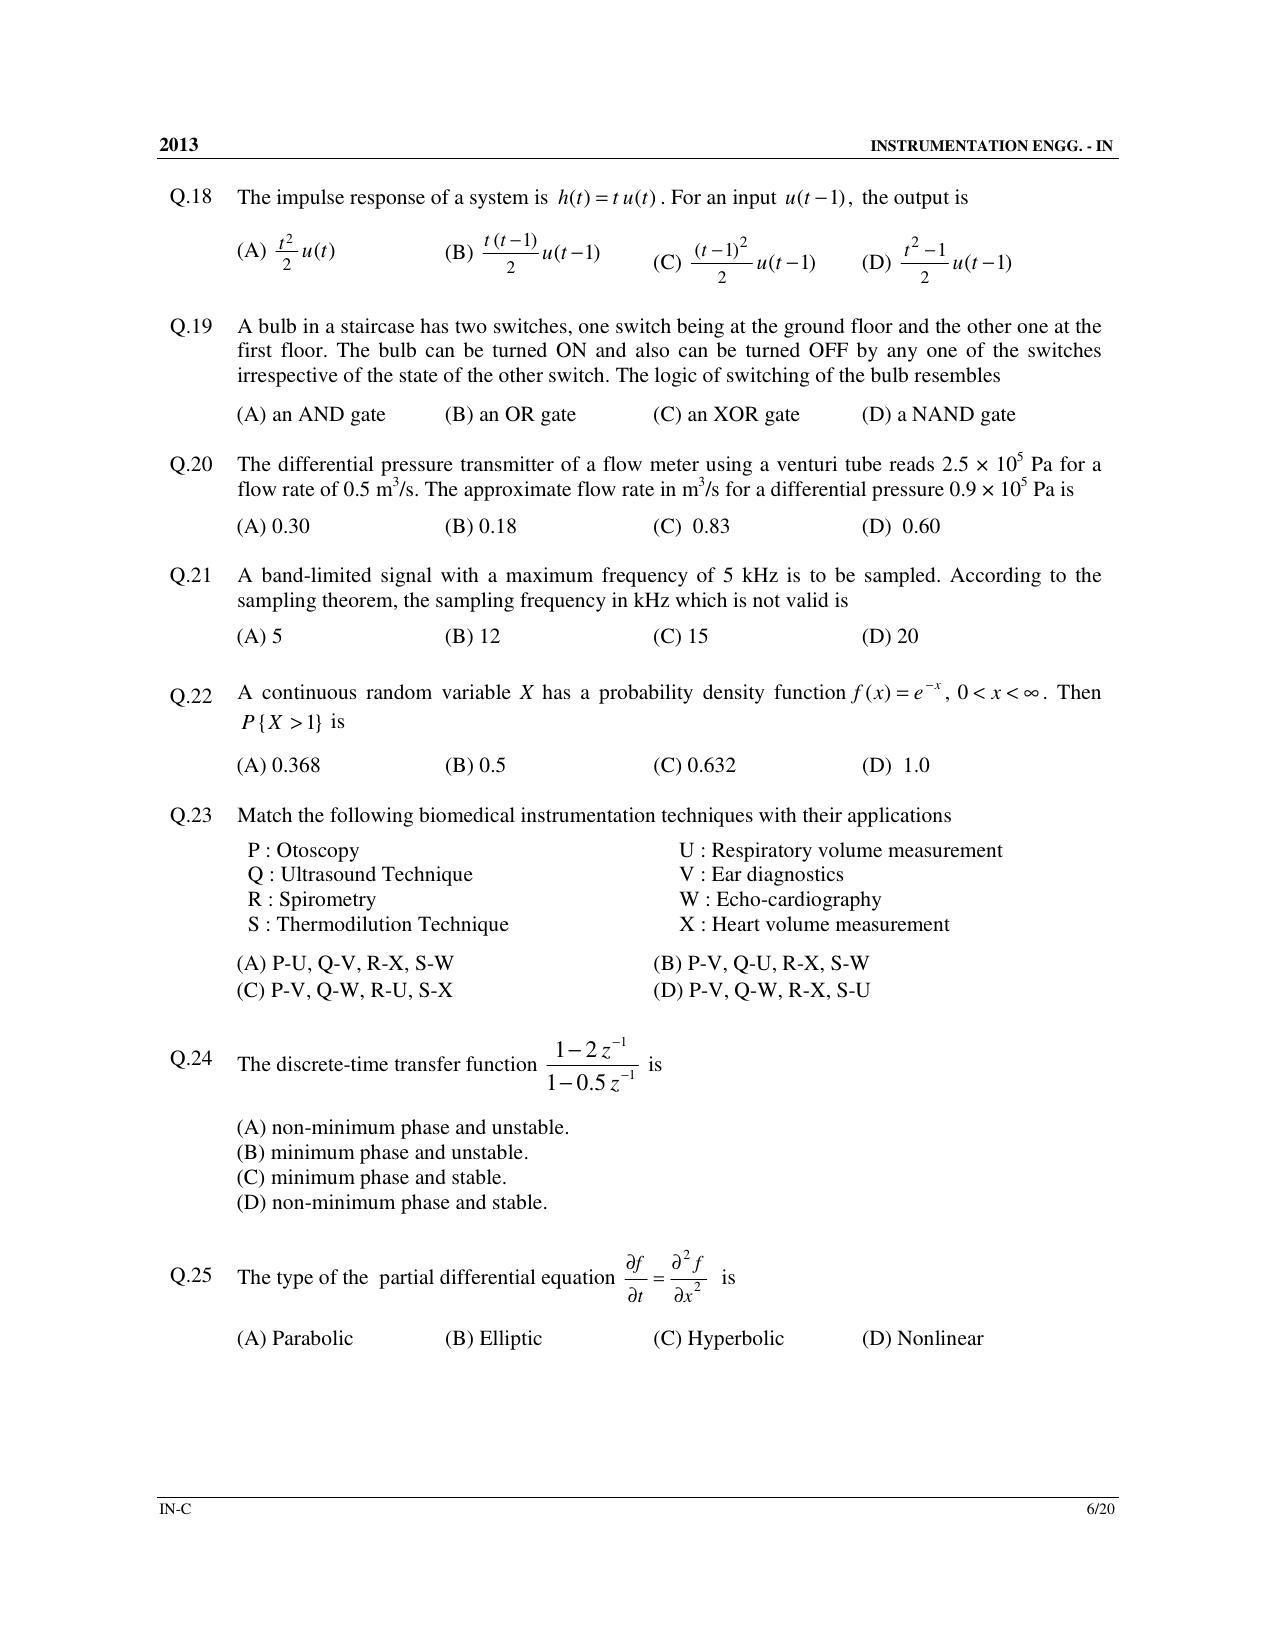 GATE 2013 Instrumentation Engineering (IN) Question Paper with Answer Key - Page 41